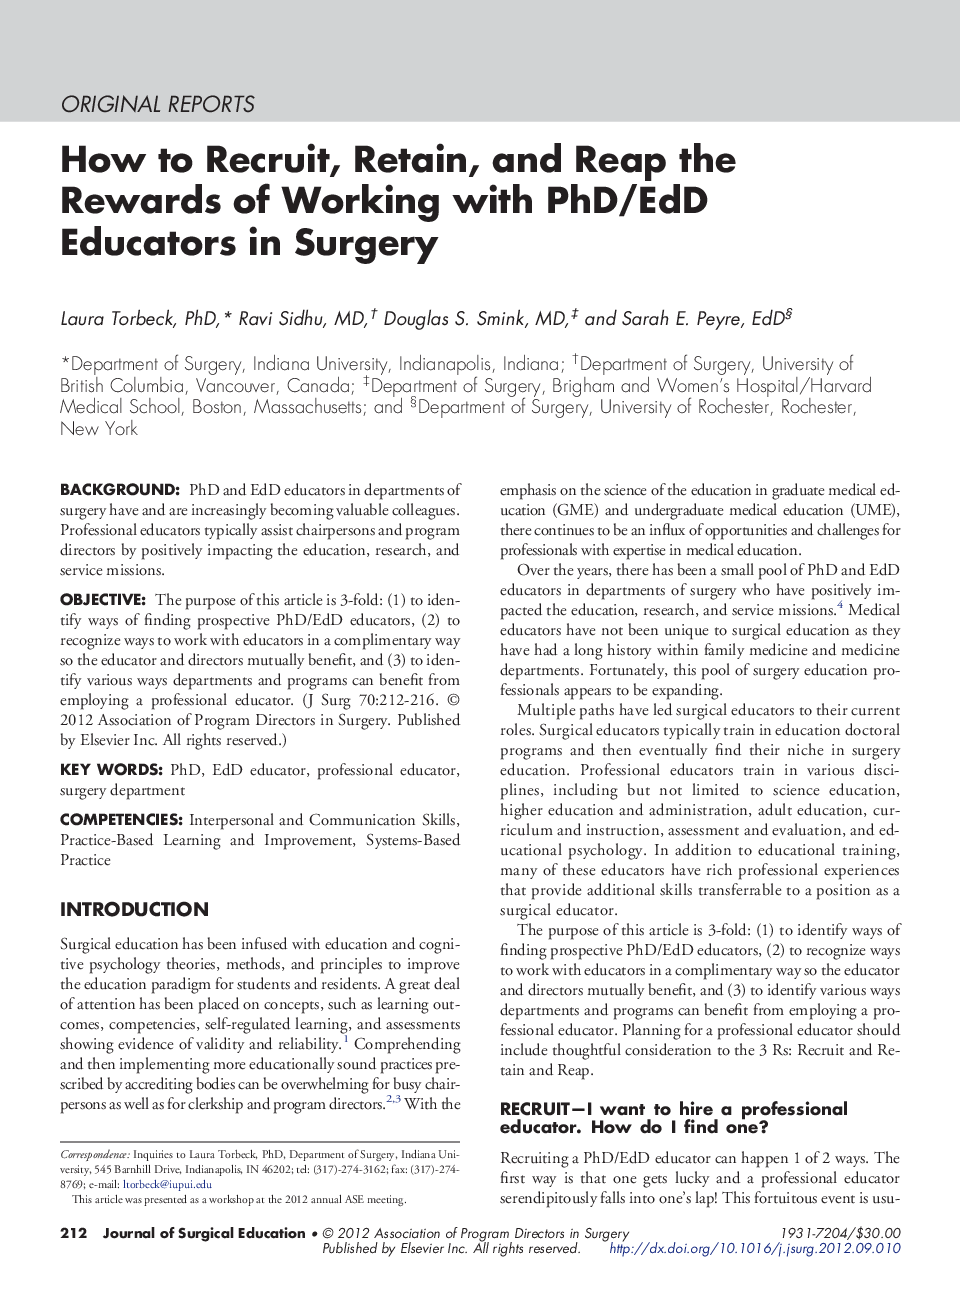 How to Recruit, Retain, and Reap the Rewards of Working with PhD/EdD Educators in Surgery